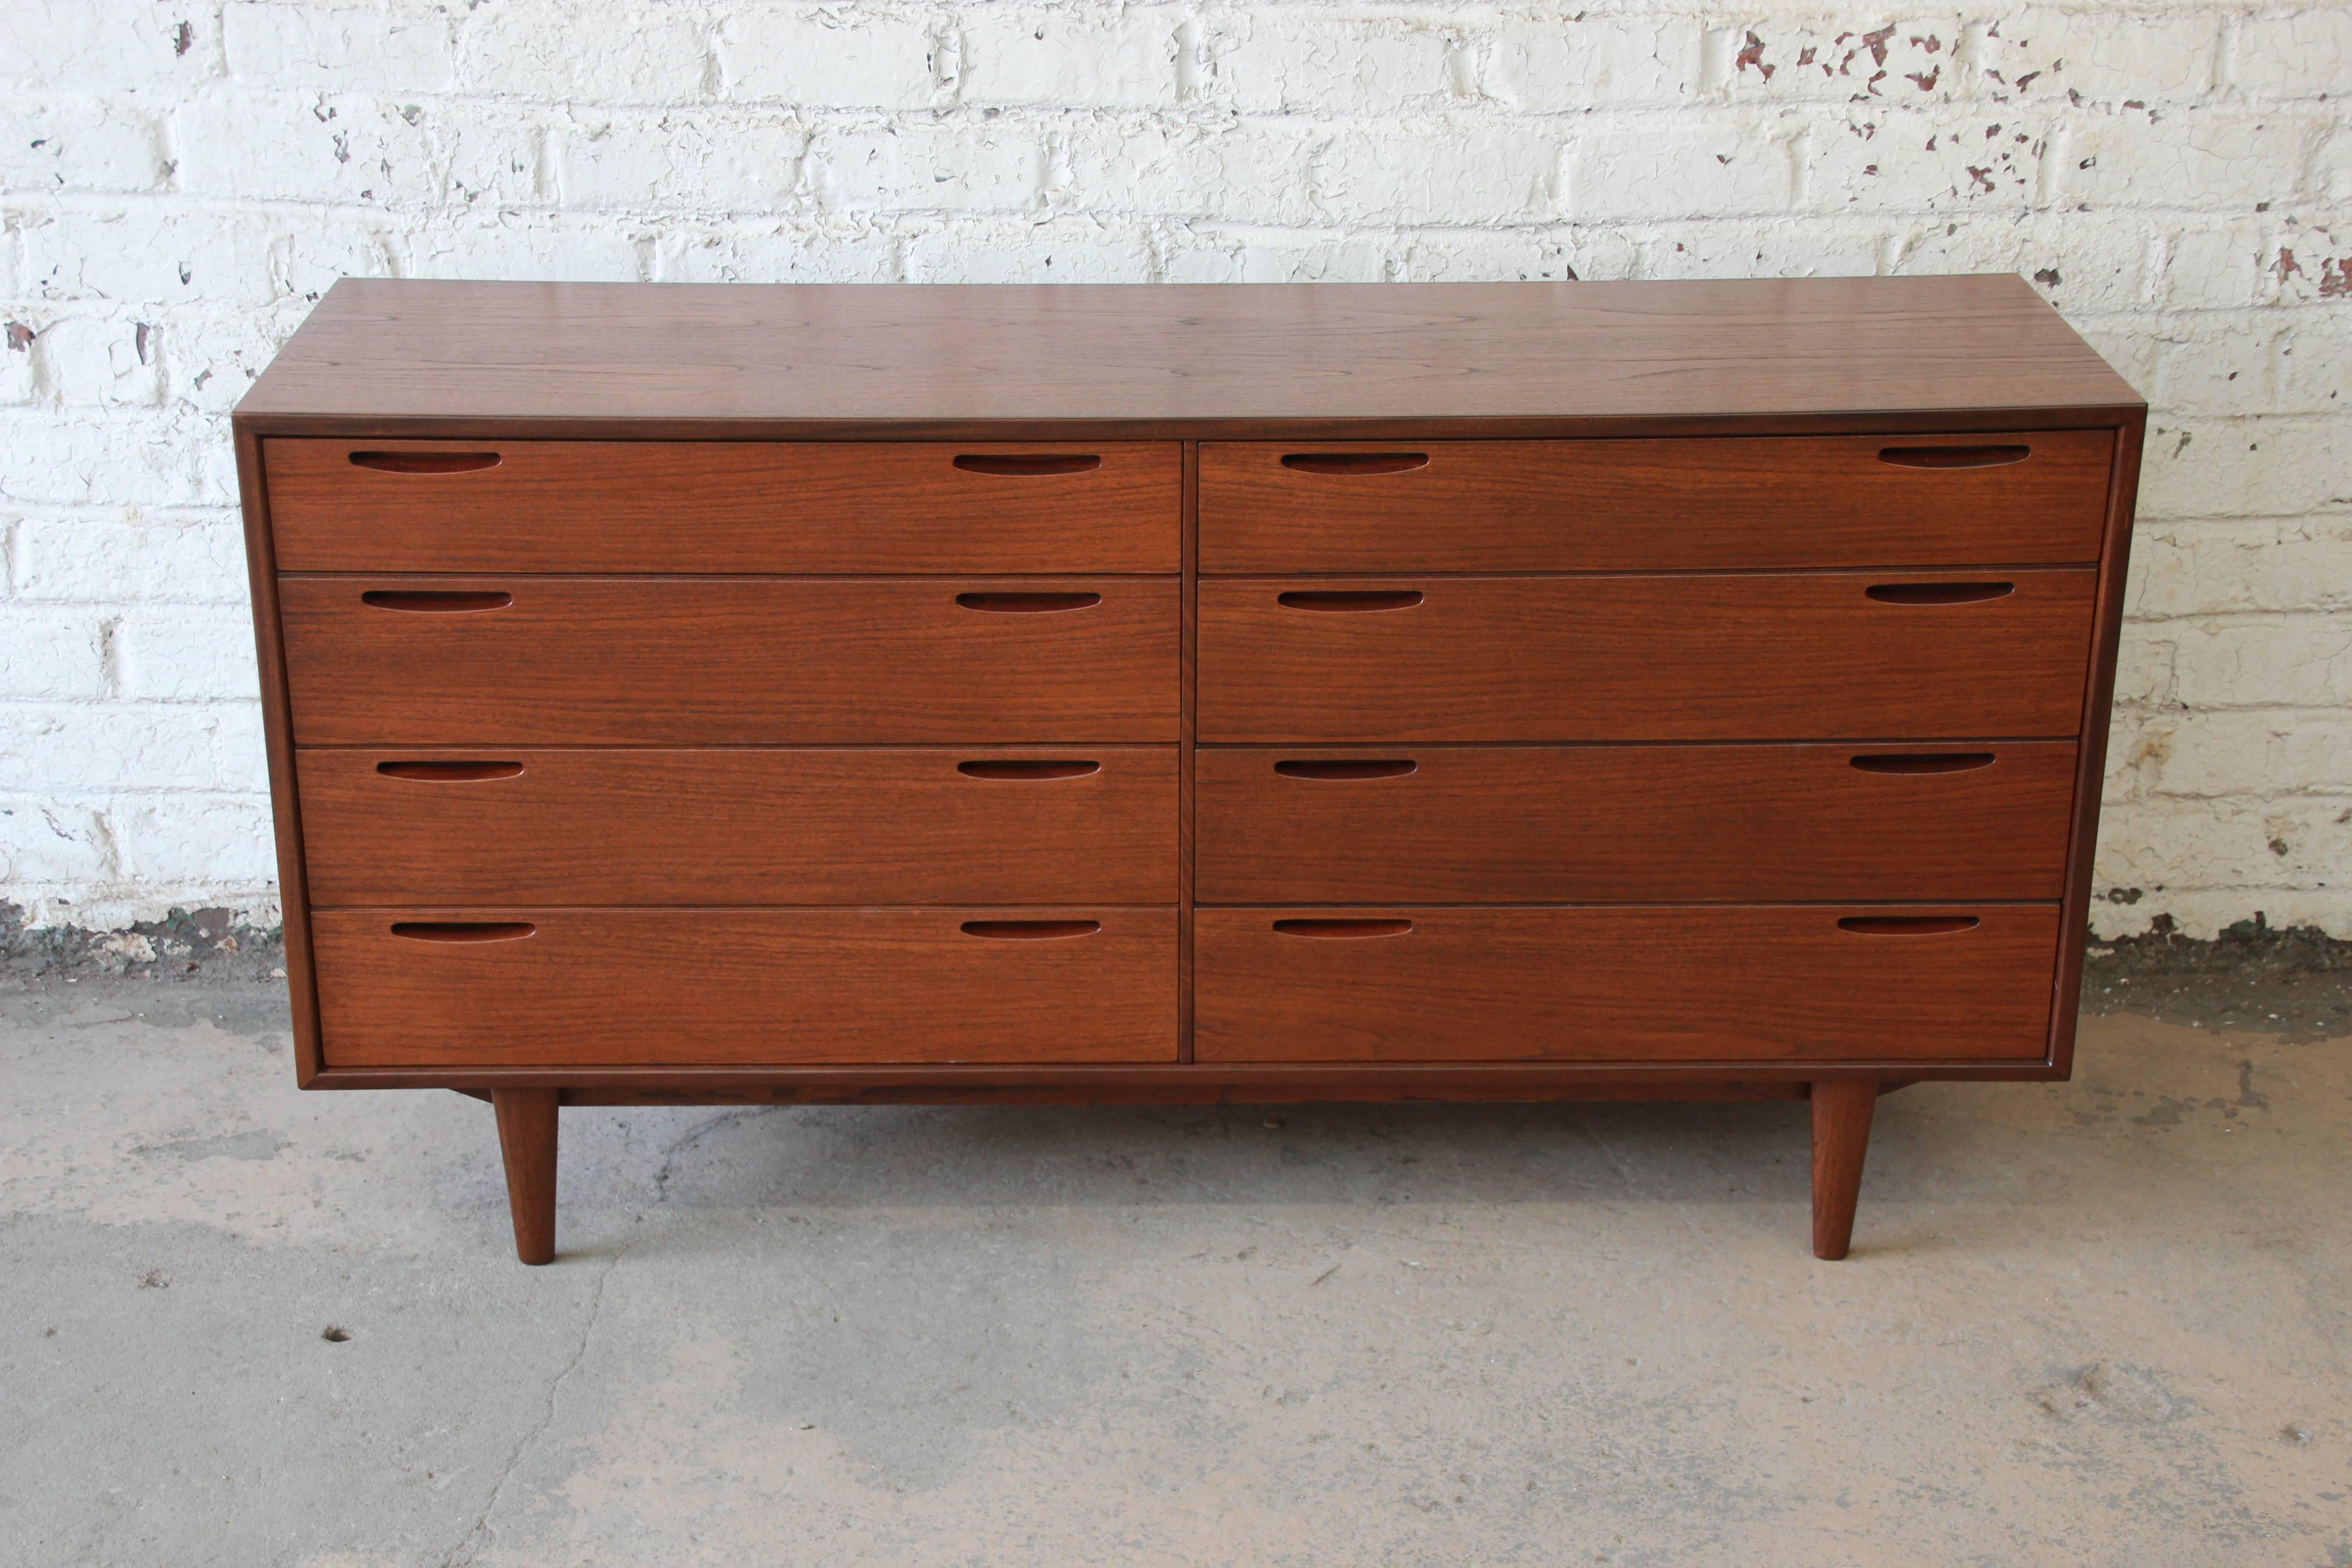 An exceptional 1950s Danish modern teak eight-drawer dresser or credenza. The dresser features gorgeous teak wood grain and sleek Danish Modern design. It offers ample room for storage with eight drawers, each with minimalist inset pulls. The